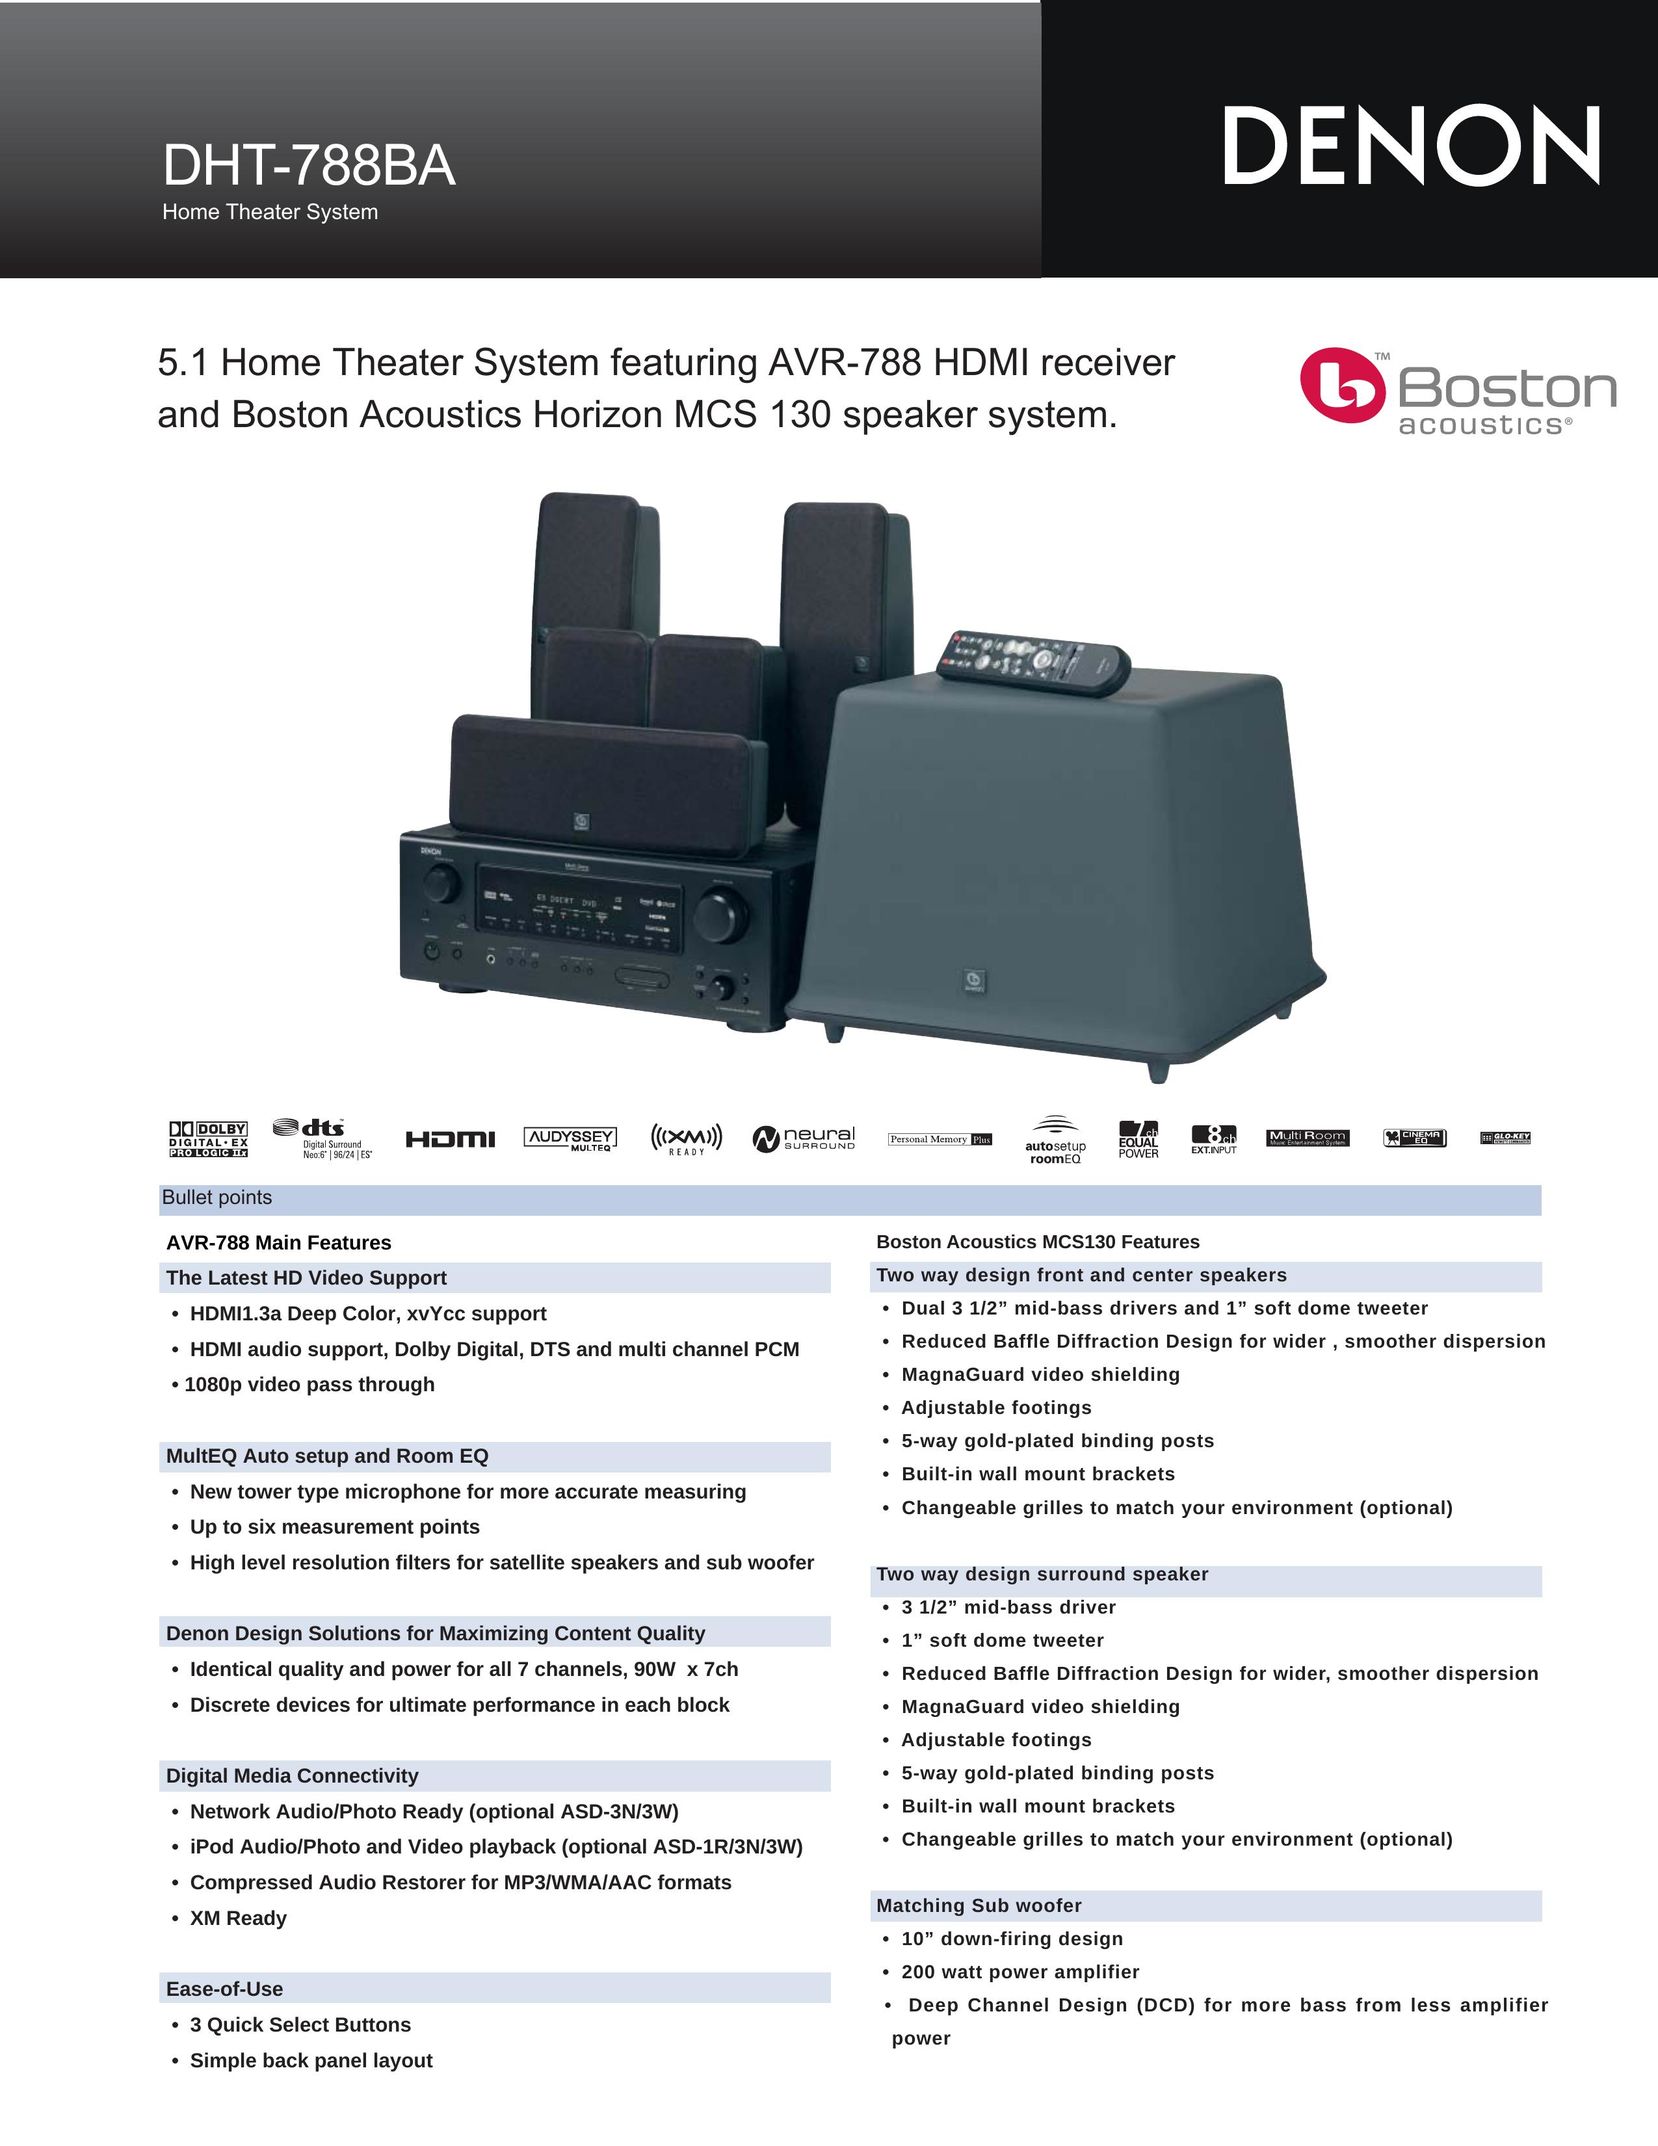 Denon DHT-788BA Home Theater System User Manual